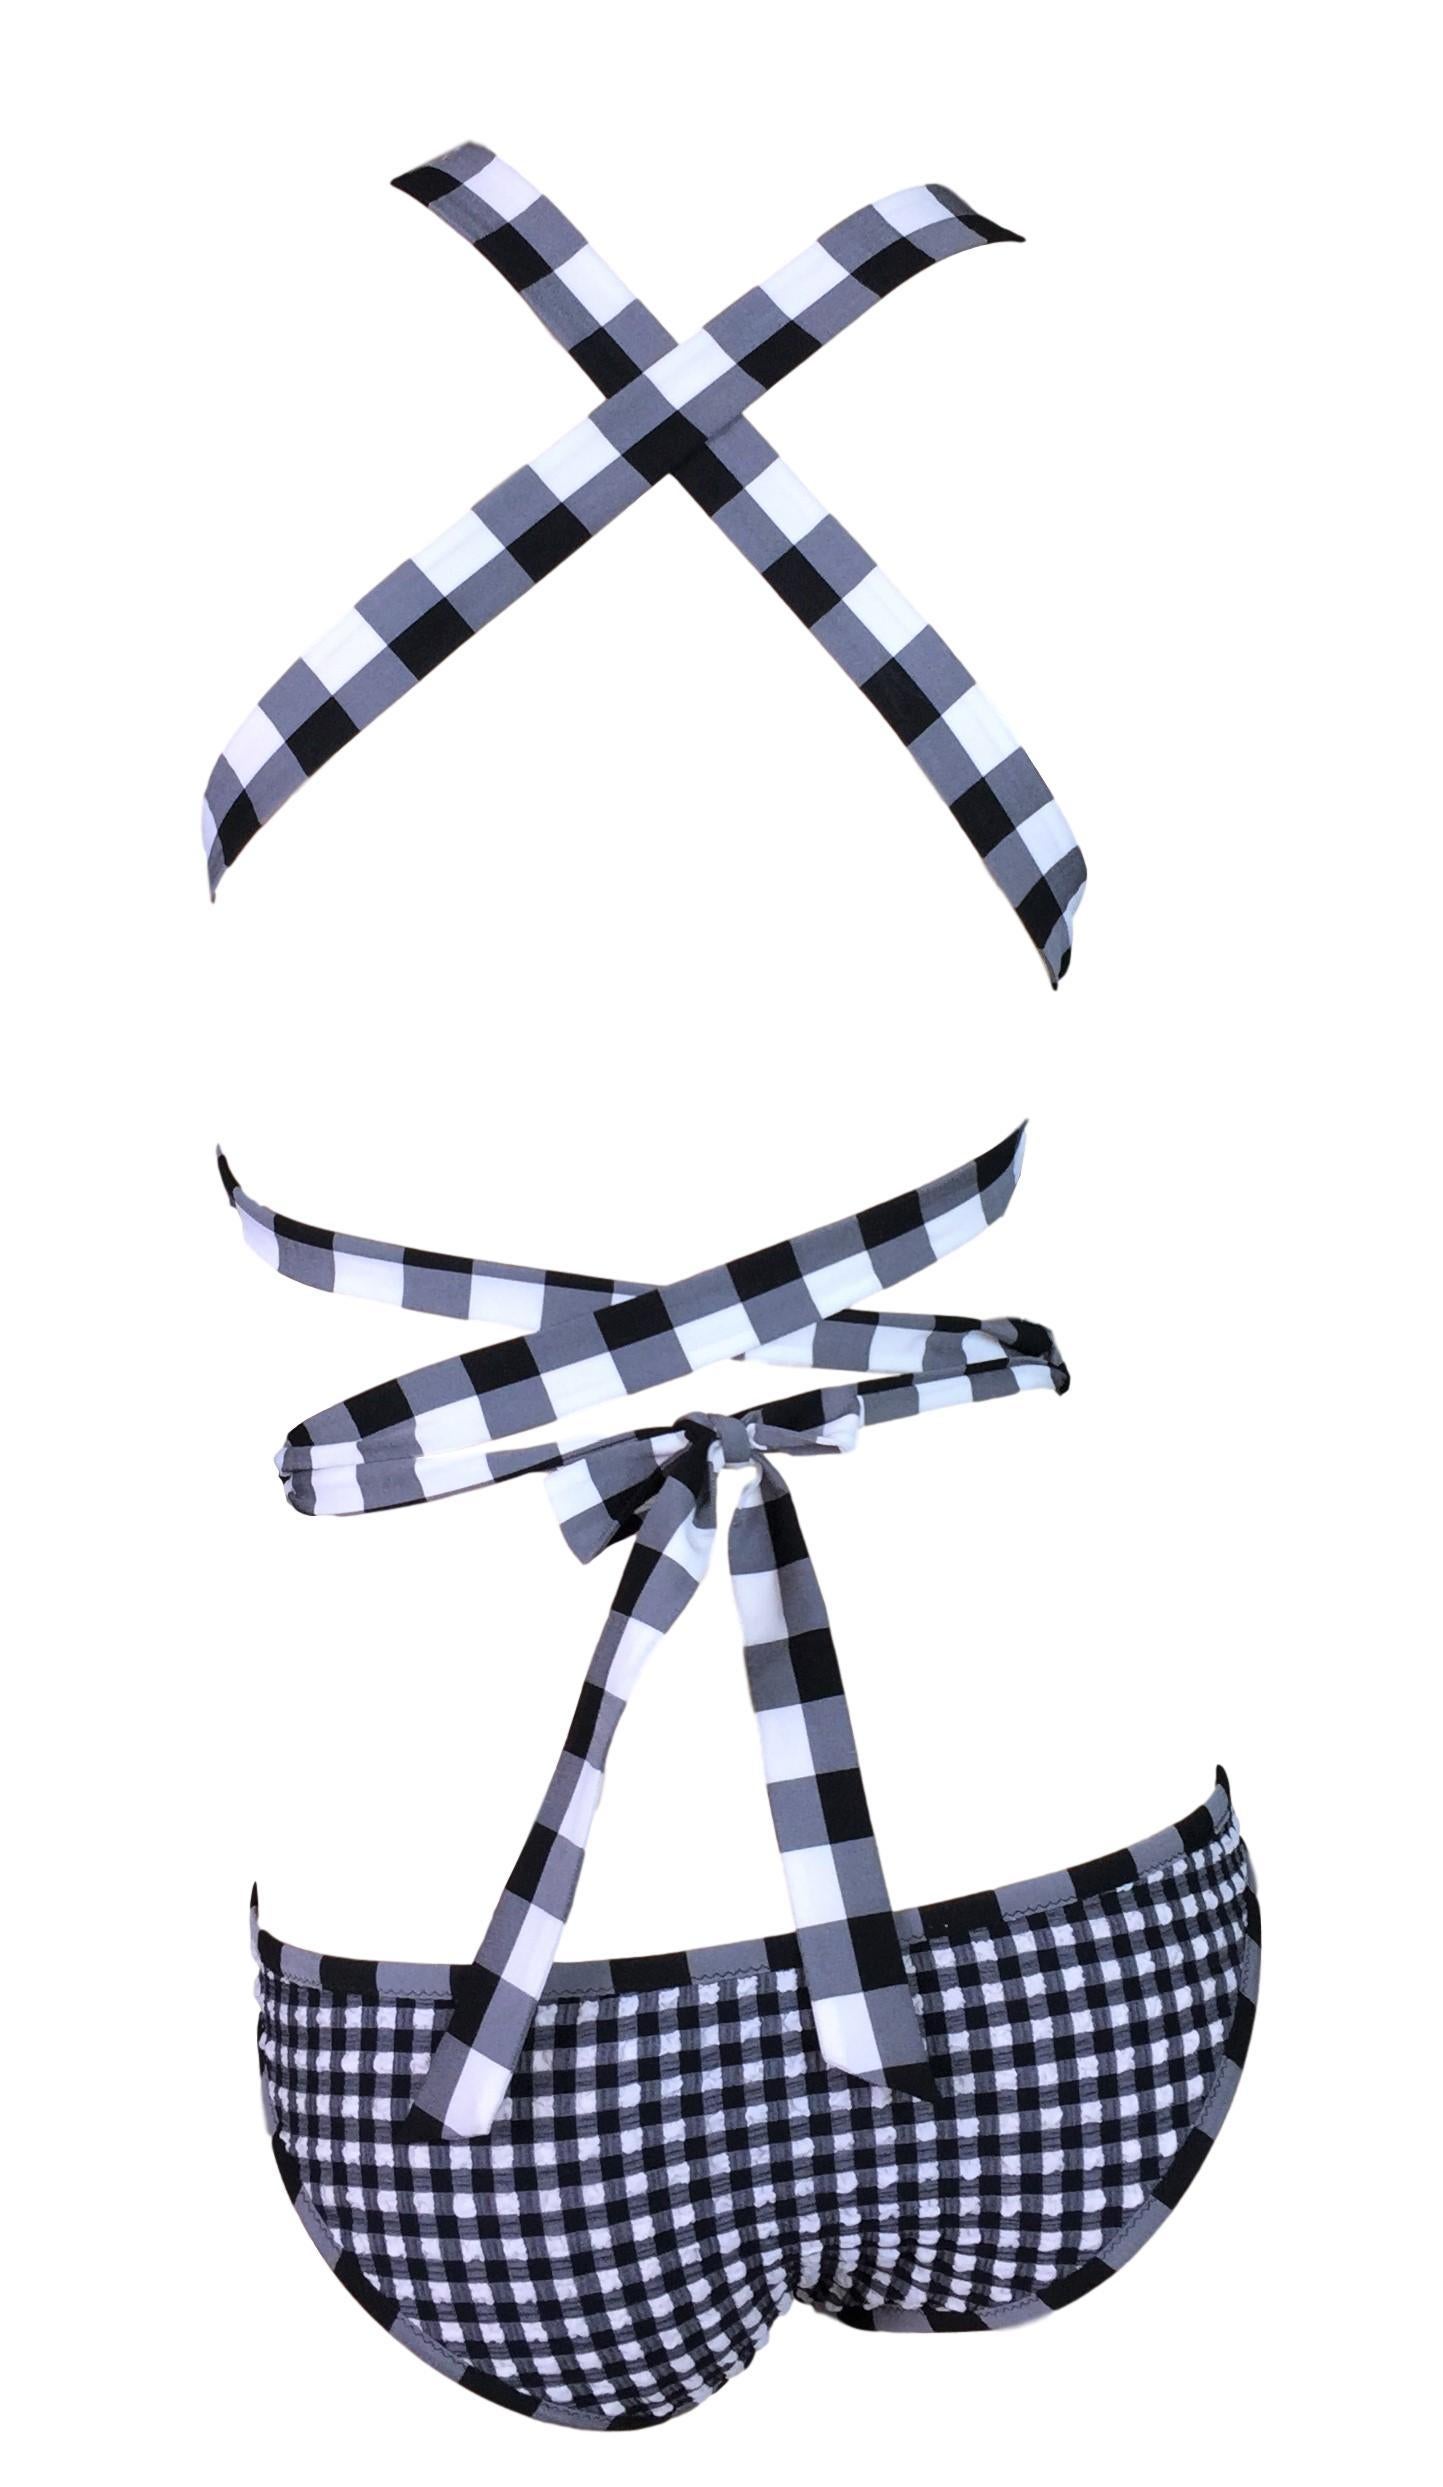 Gray S/S 2007 Yves Saint Laurent Pin-Up Gingham Black & White Cut-Out Swimsuit